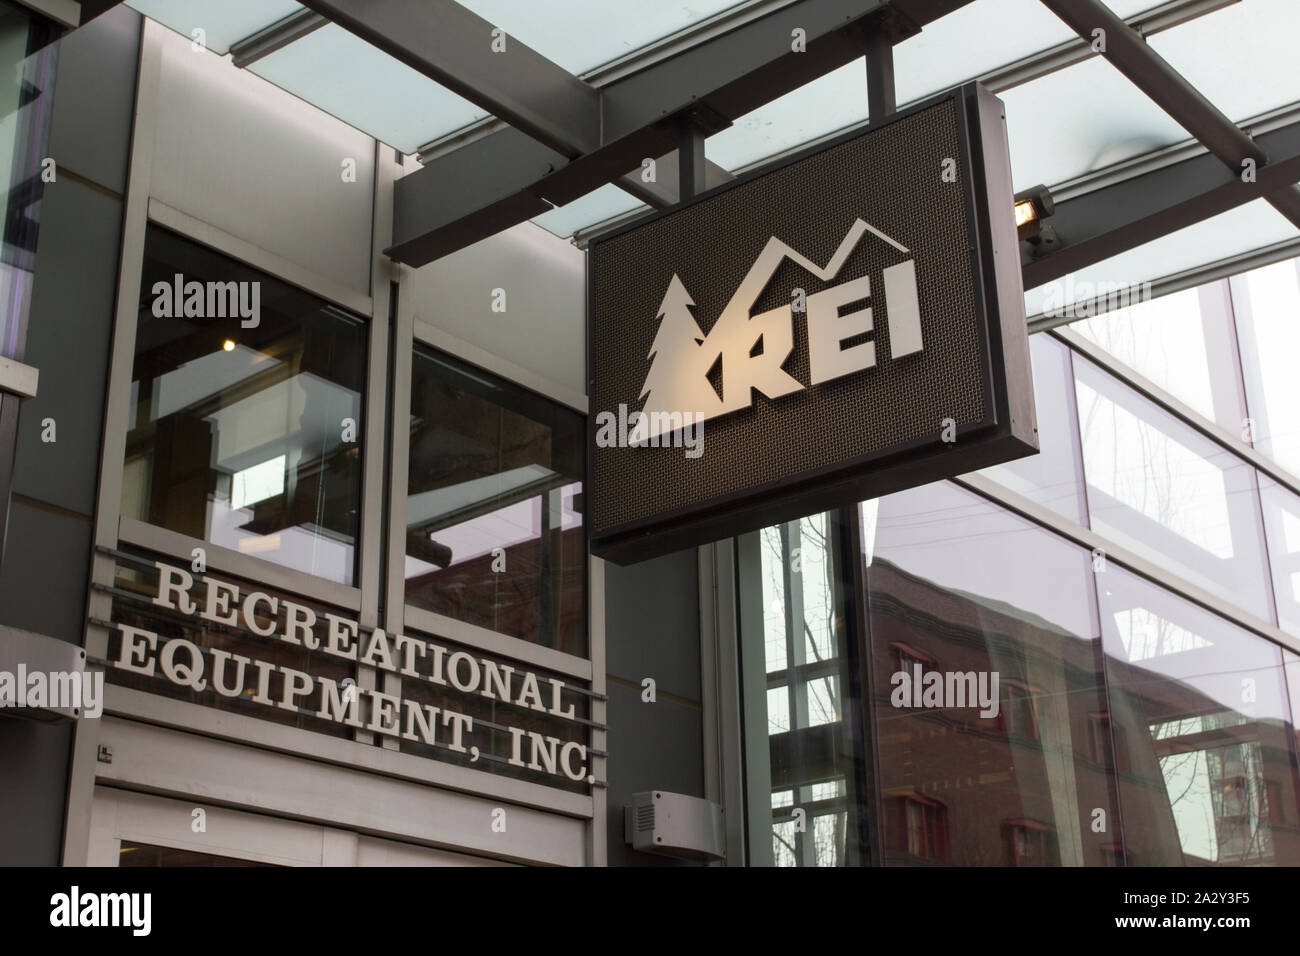 REI Pineville Store - Pineville, NC - Sporting Goods, Camping Gear